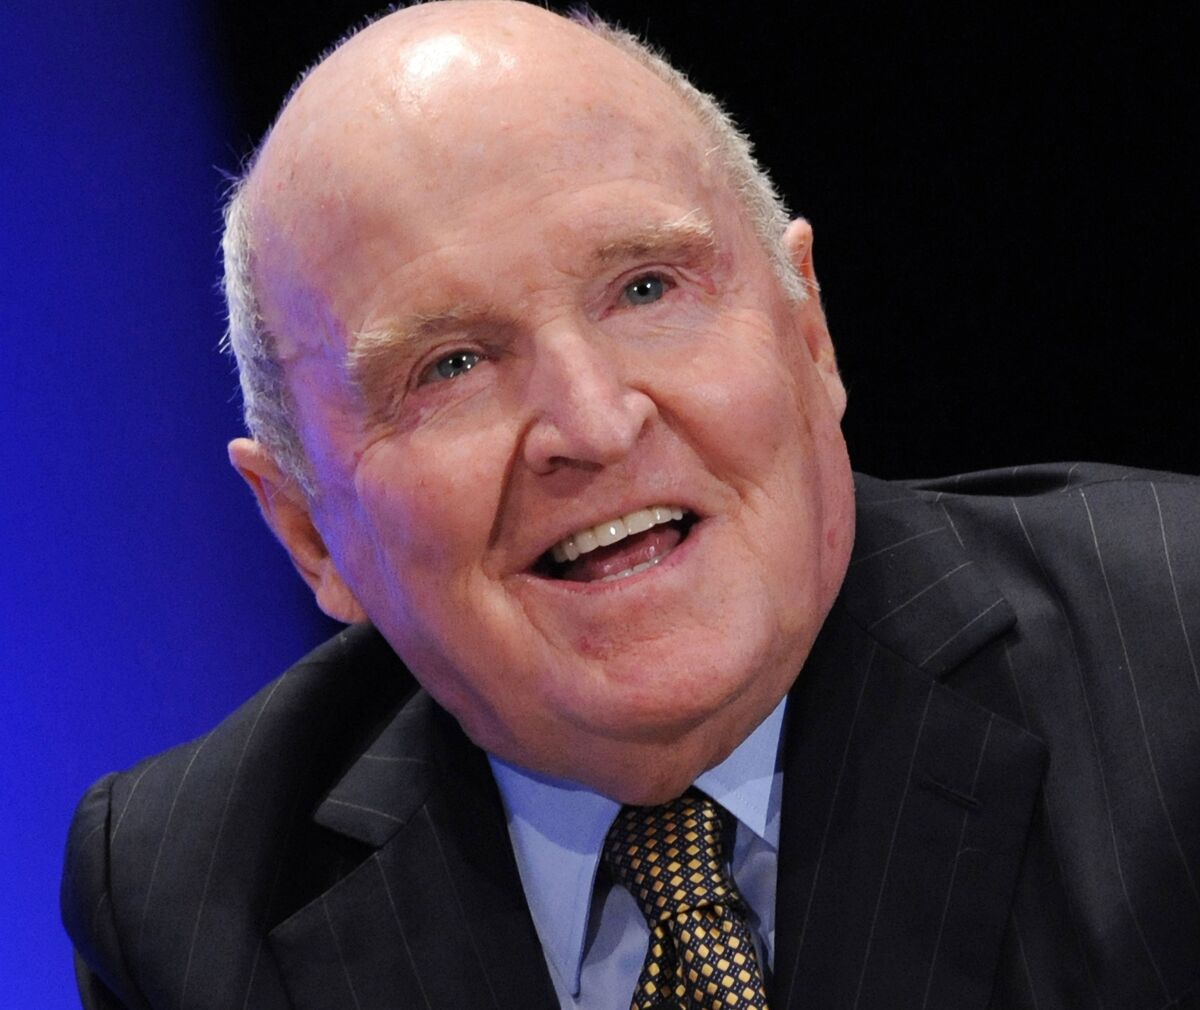 Former GE Chairman Jack Welch Has Died: CNBC - Bloomberg